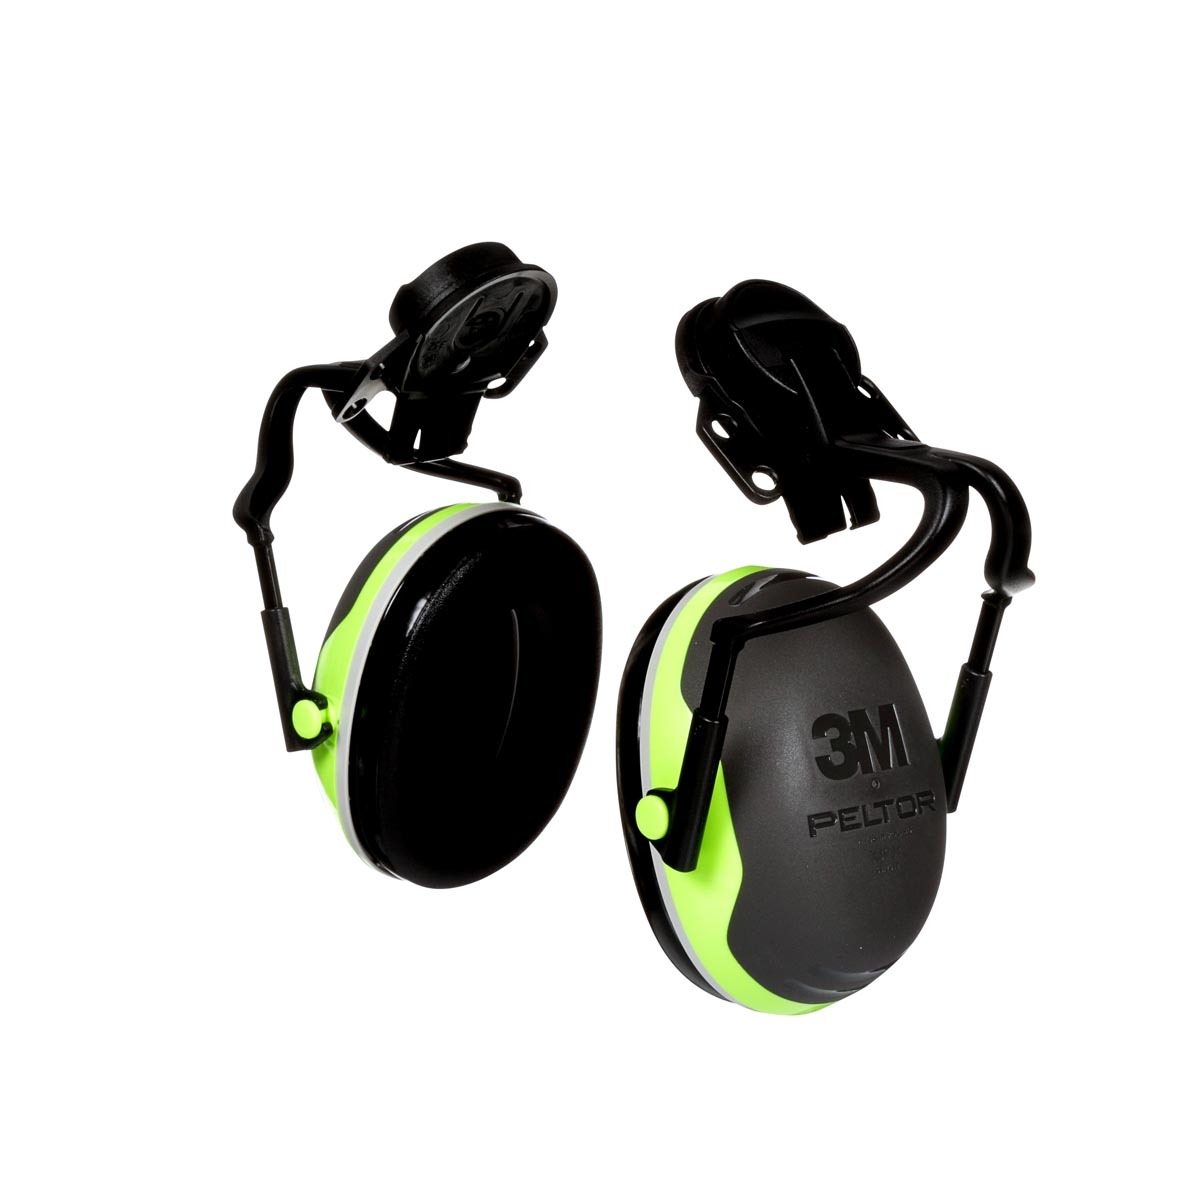 3M Peltor Electronic Hearing Protection